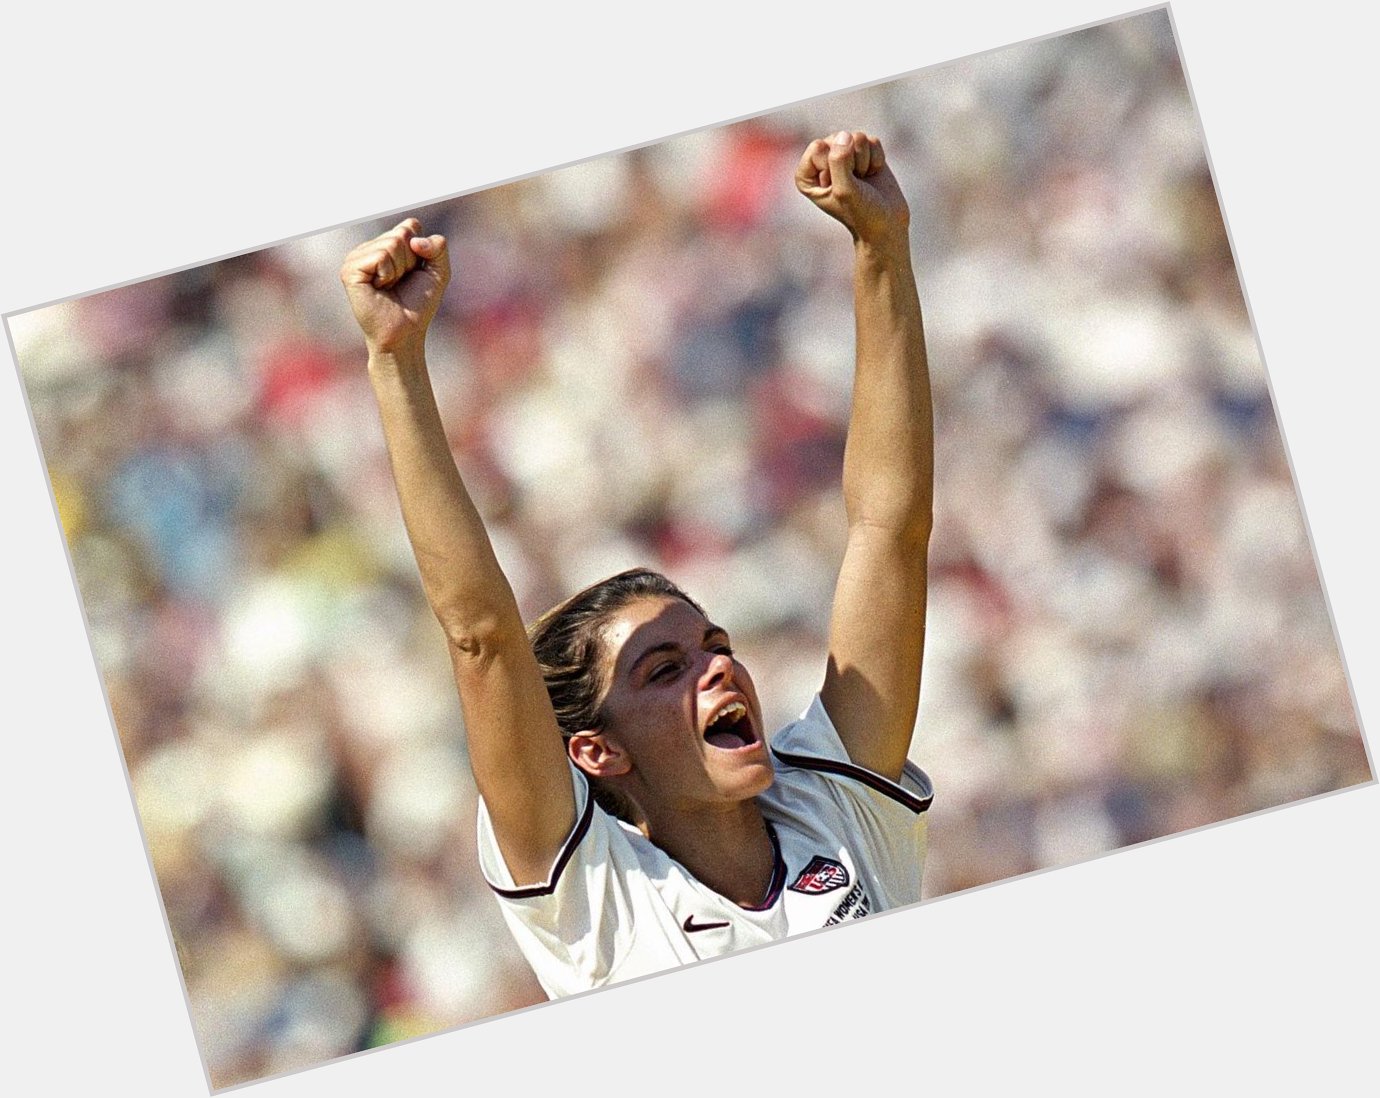 Happy birthday, Mia Hamm! The two-time World Cup winner and two-time Women\s World Player of the Year turns 43 today. 